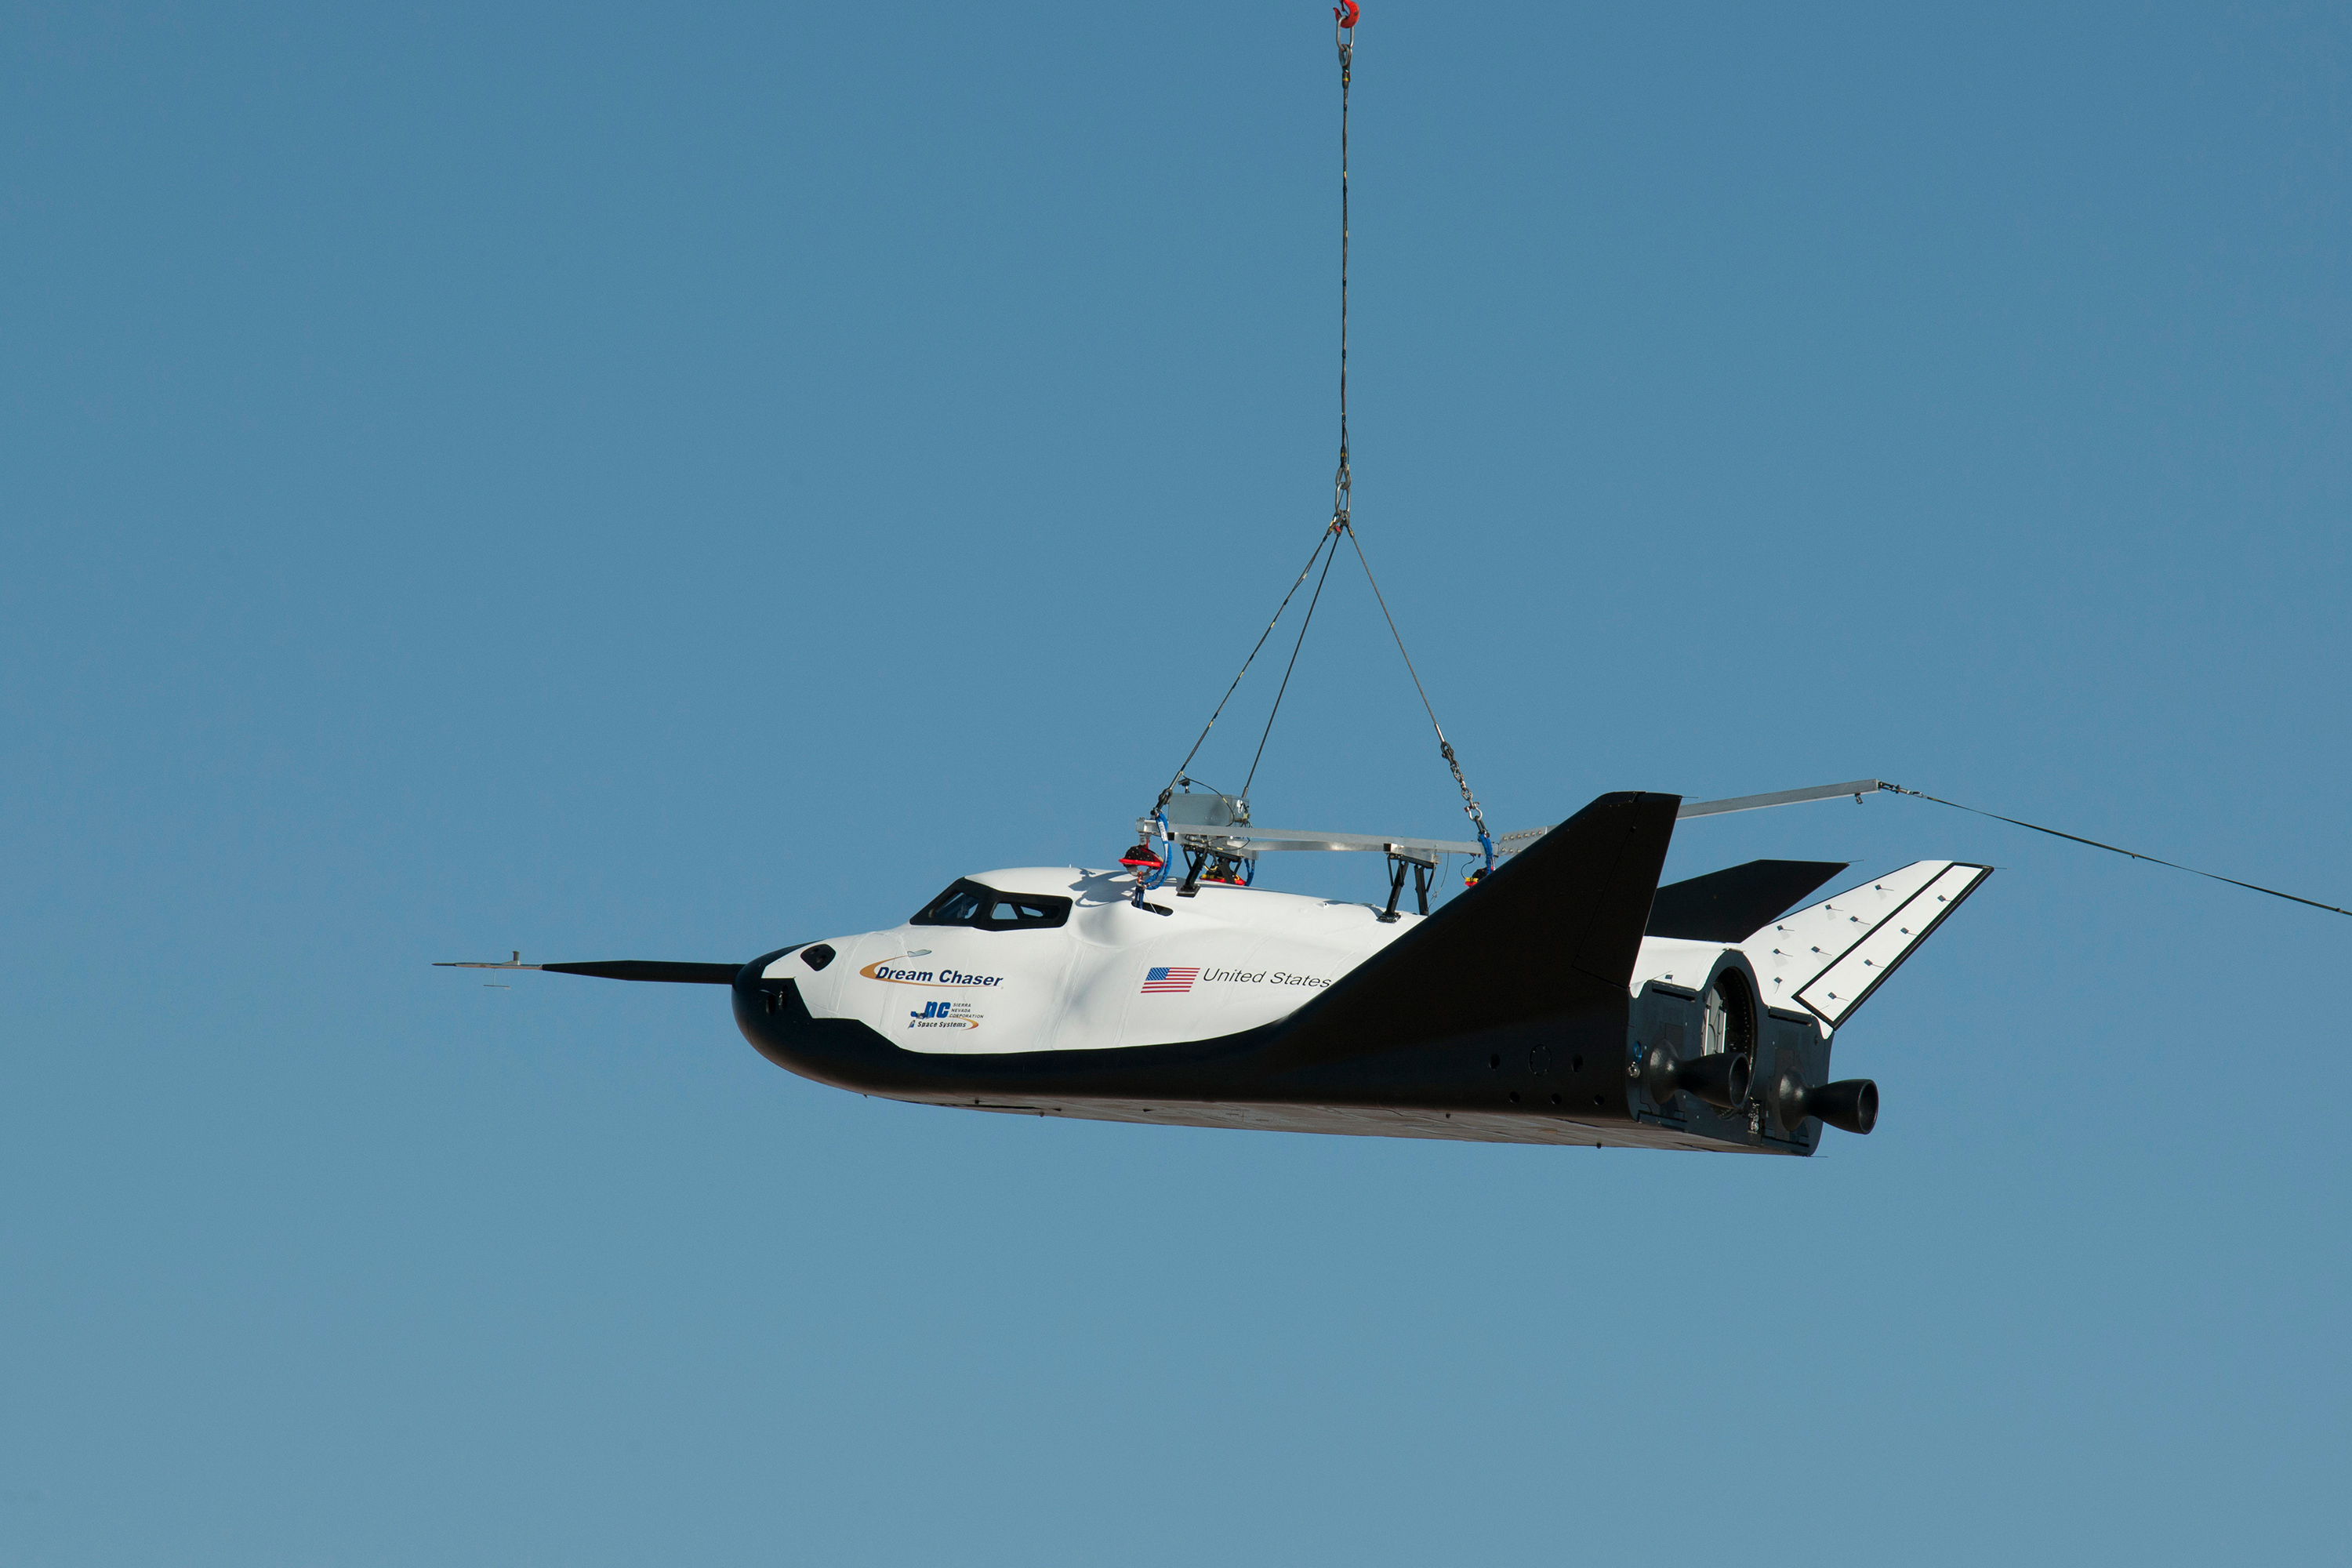 Sierra Nevada Corporation has made steady progress toward having their Dream Chaser space plane send crews to the International Space Station. Photo Credit: Sierra Nevada Corporation